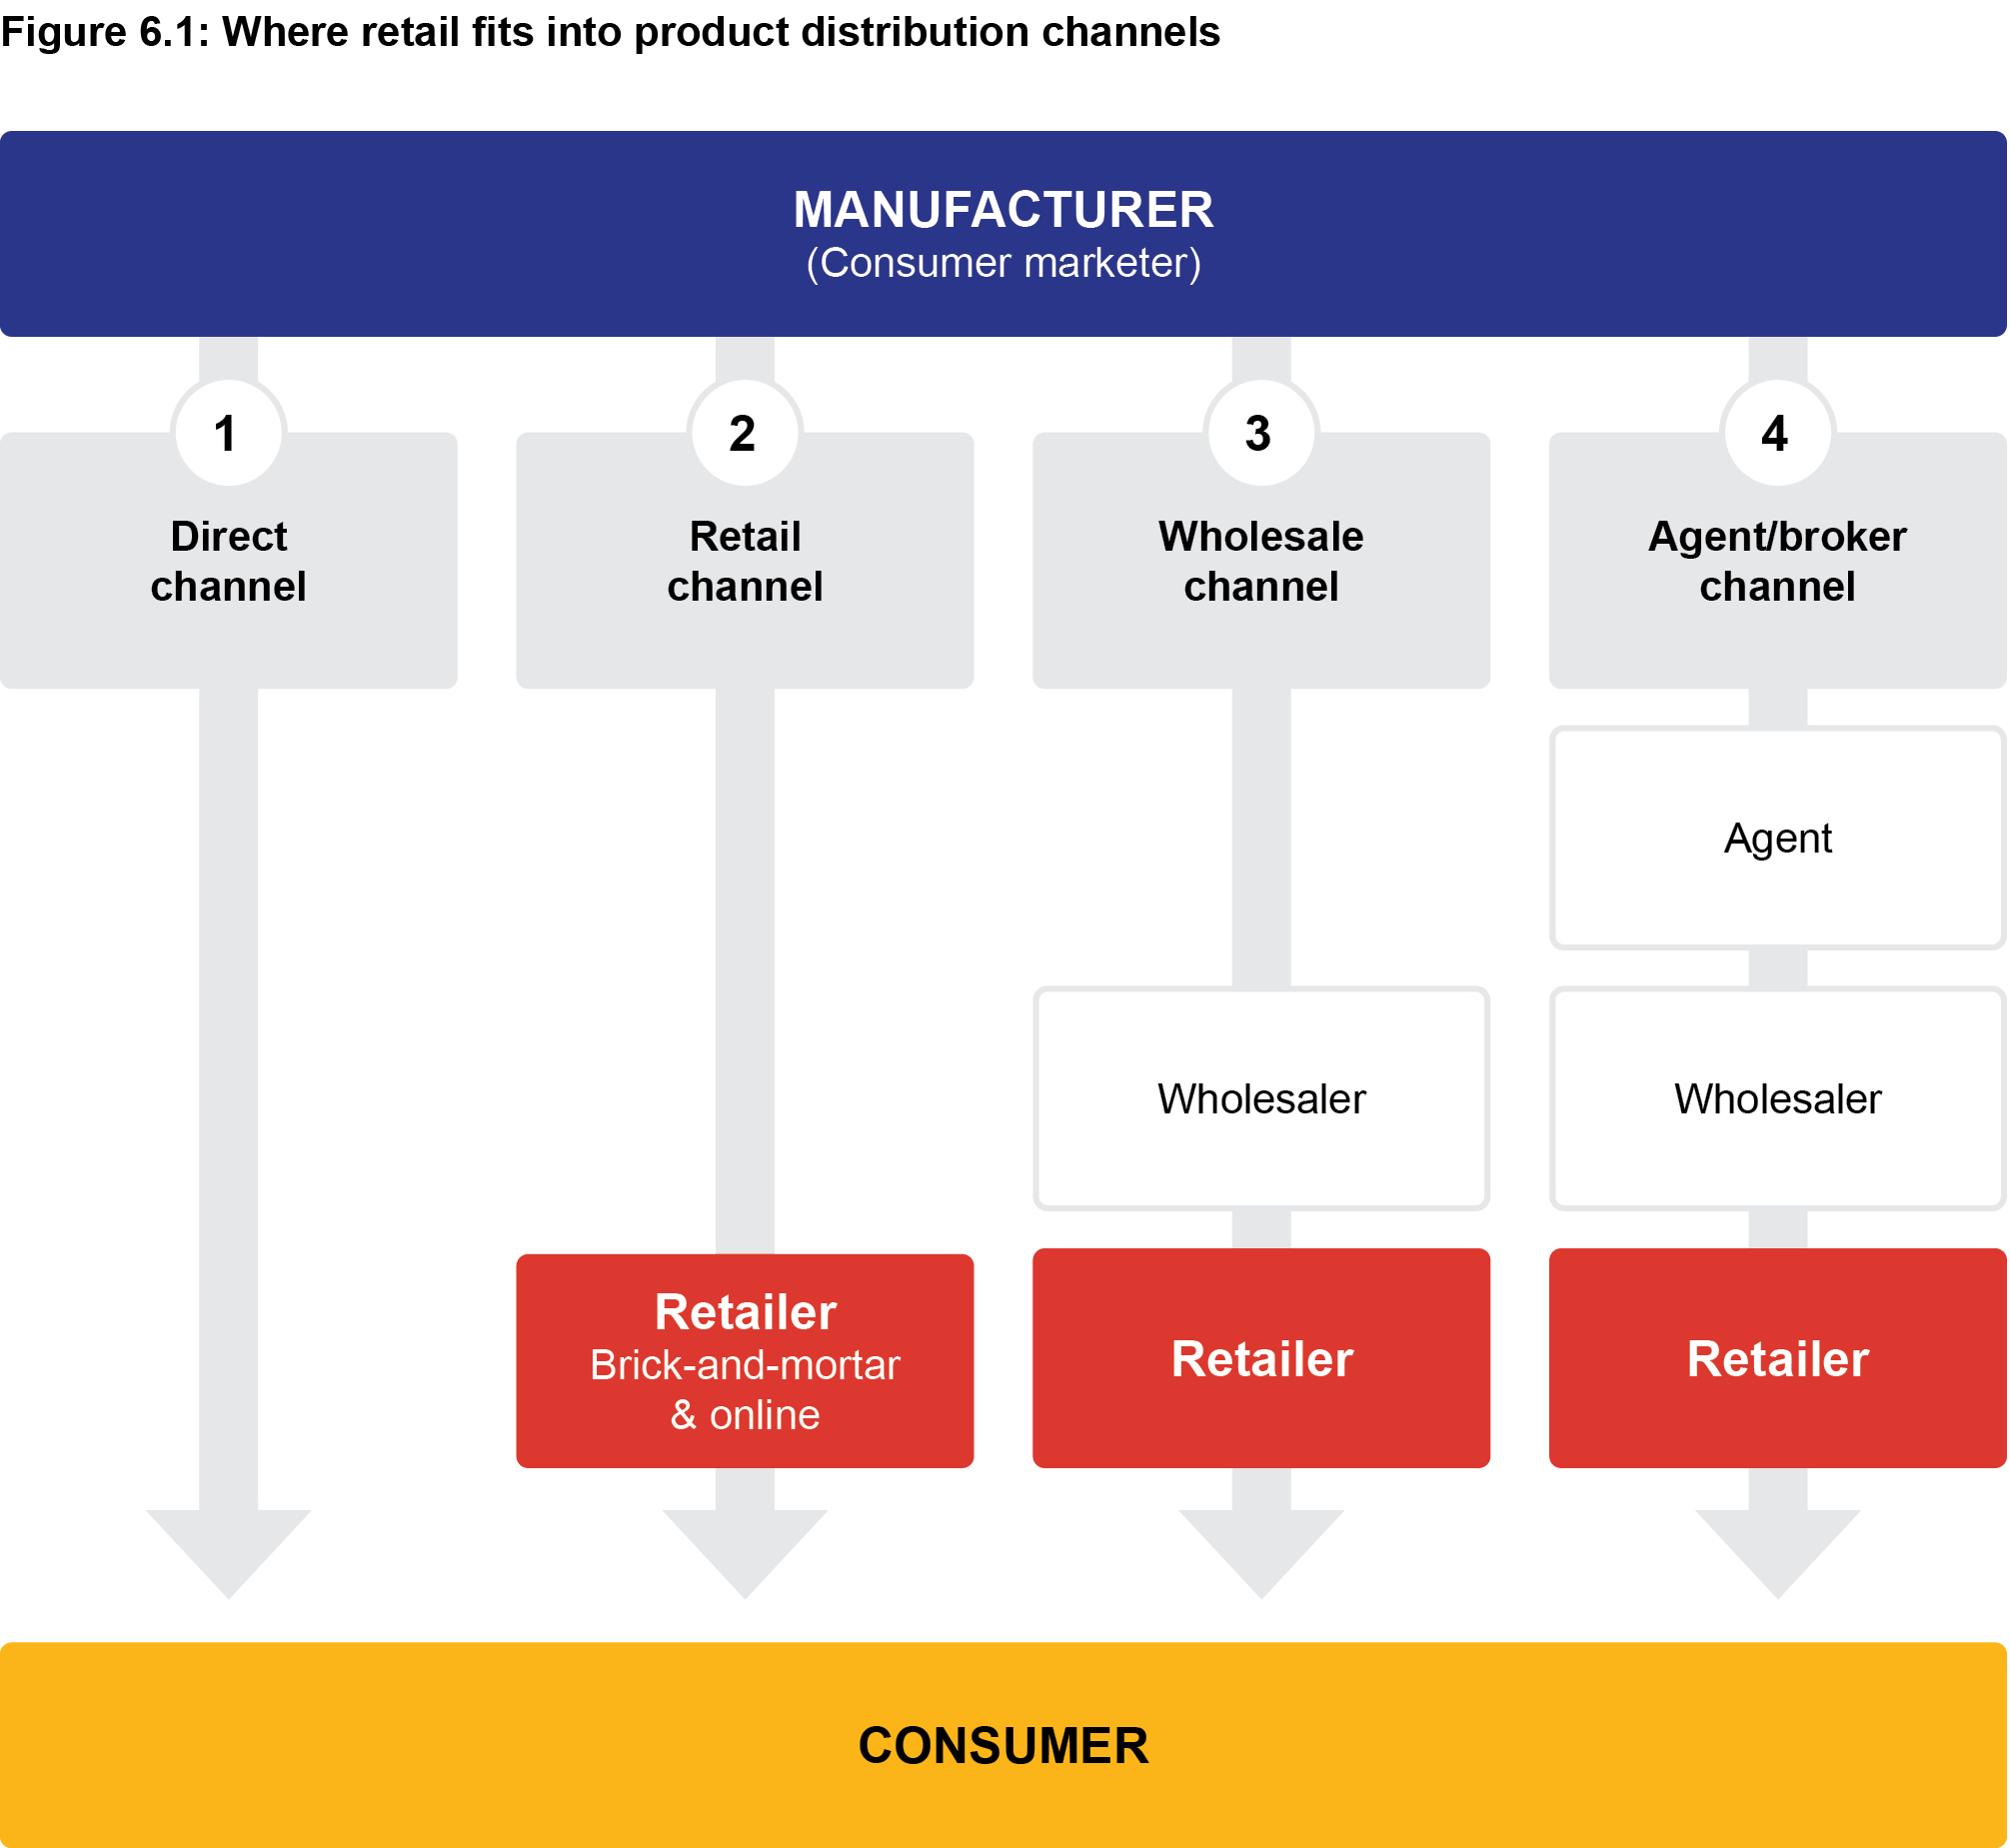 Figure 6.1: Where retail fits into product distribution channels